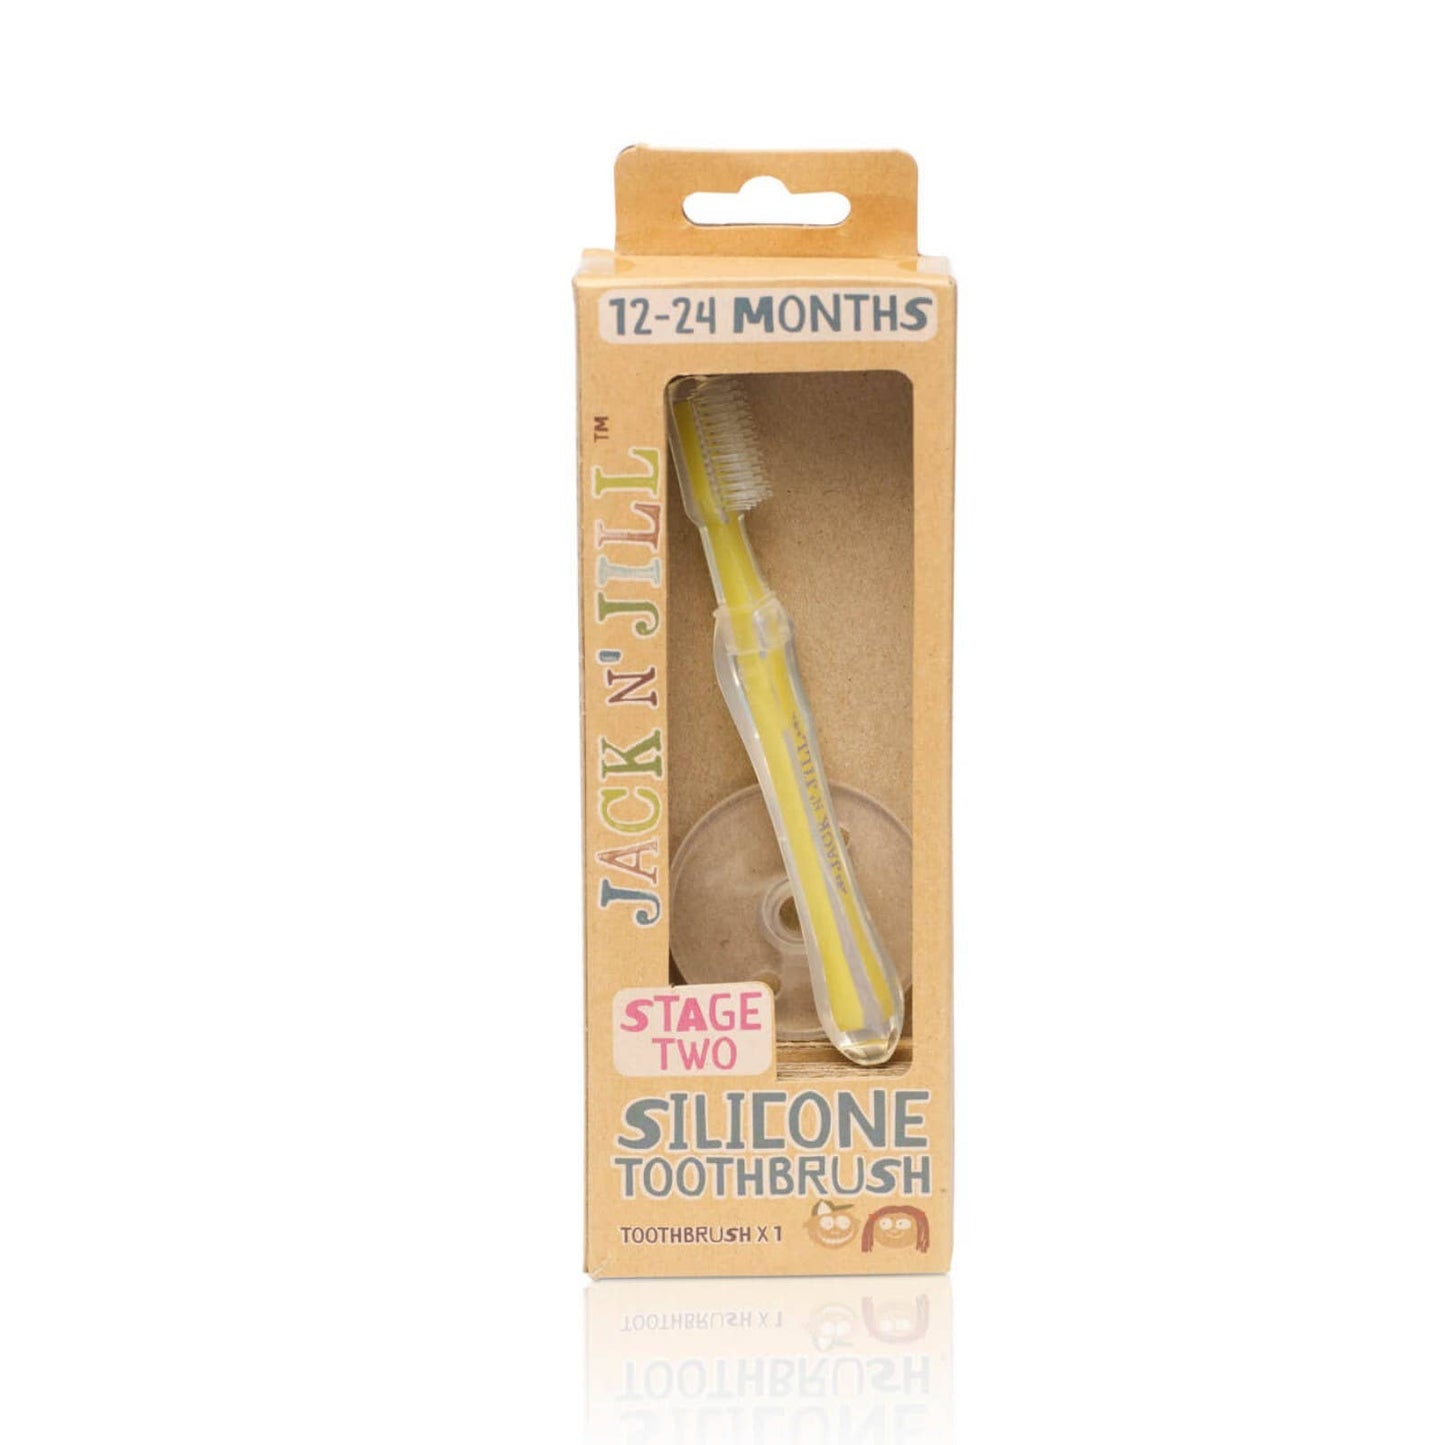 Jack N' Jill Stage 2 Silicone Toothbrush